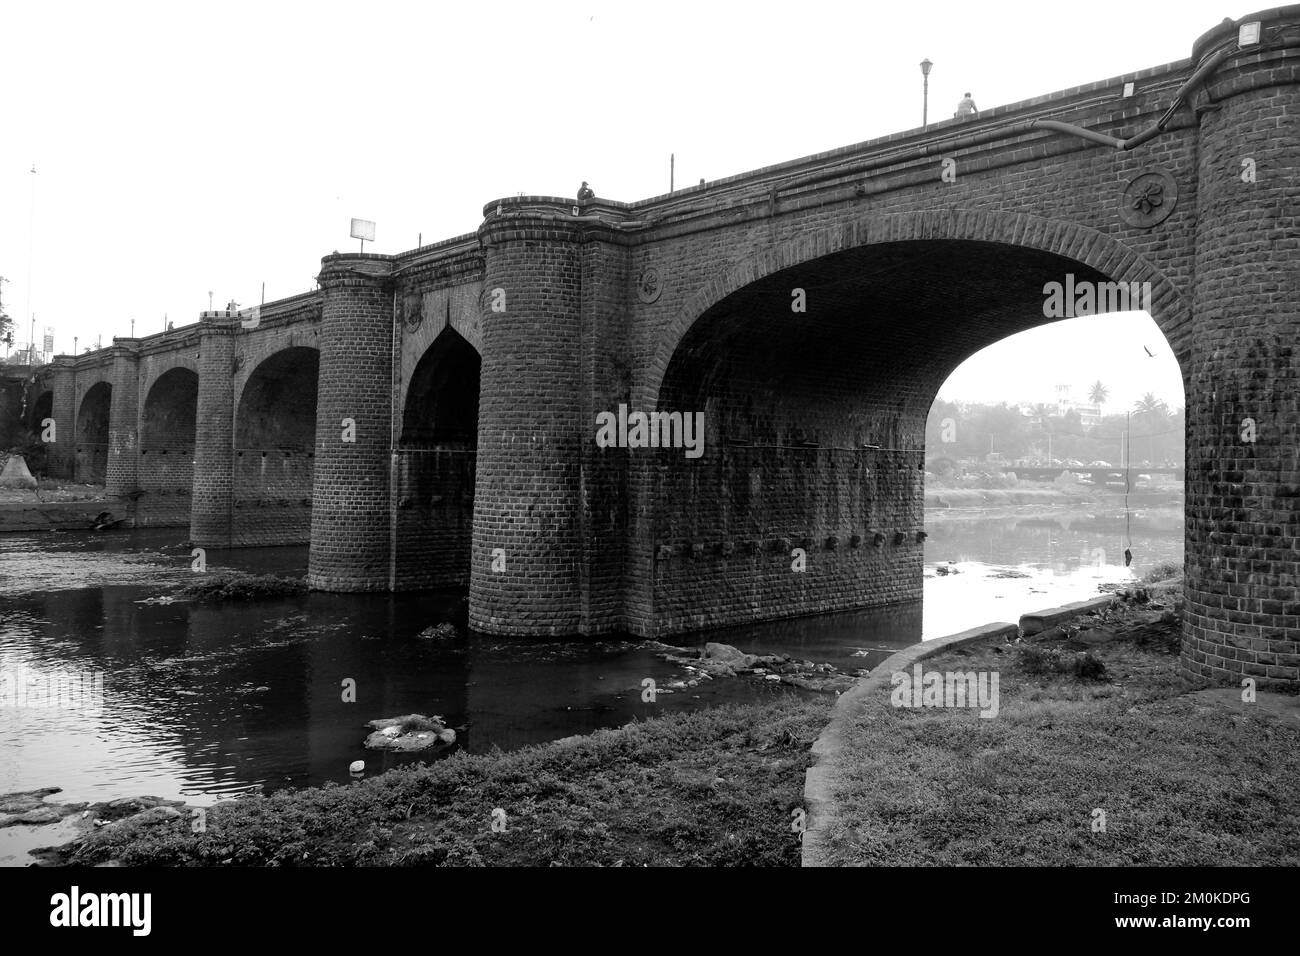 06 December 2022, Pune, India, Chhatrapati Shivaji bridge, this Heritage bridge link connecting the two banks of the river, link between the old city Stock Photo